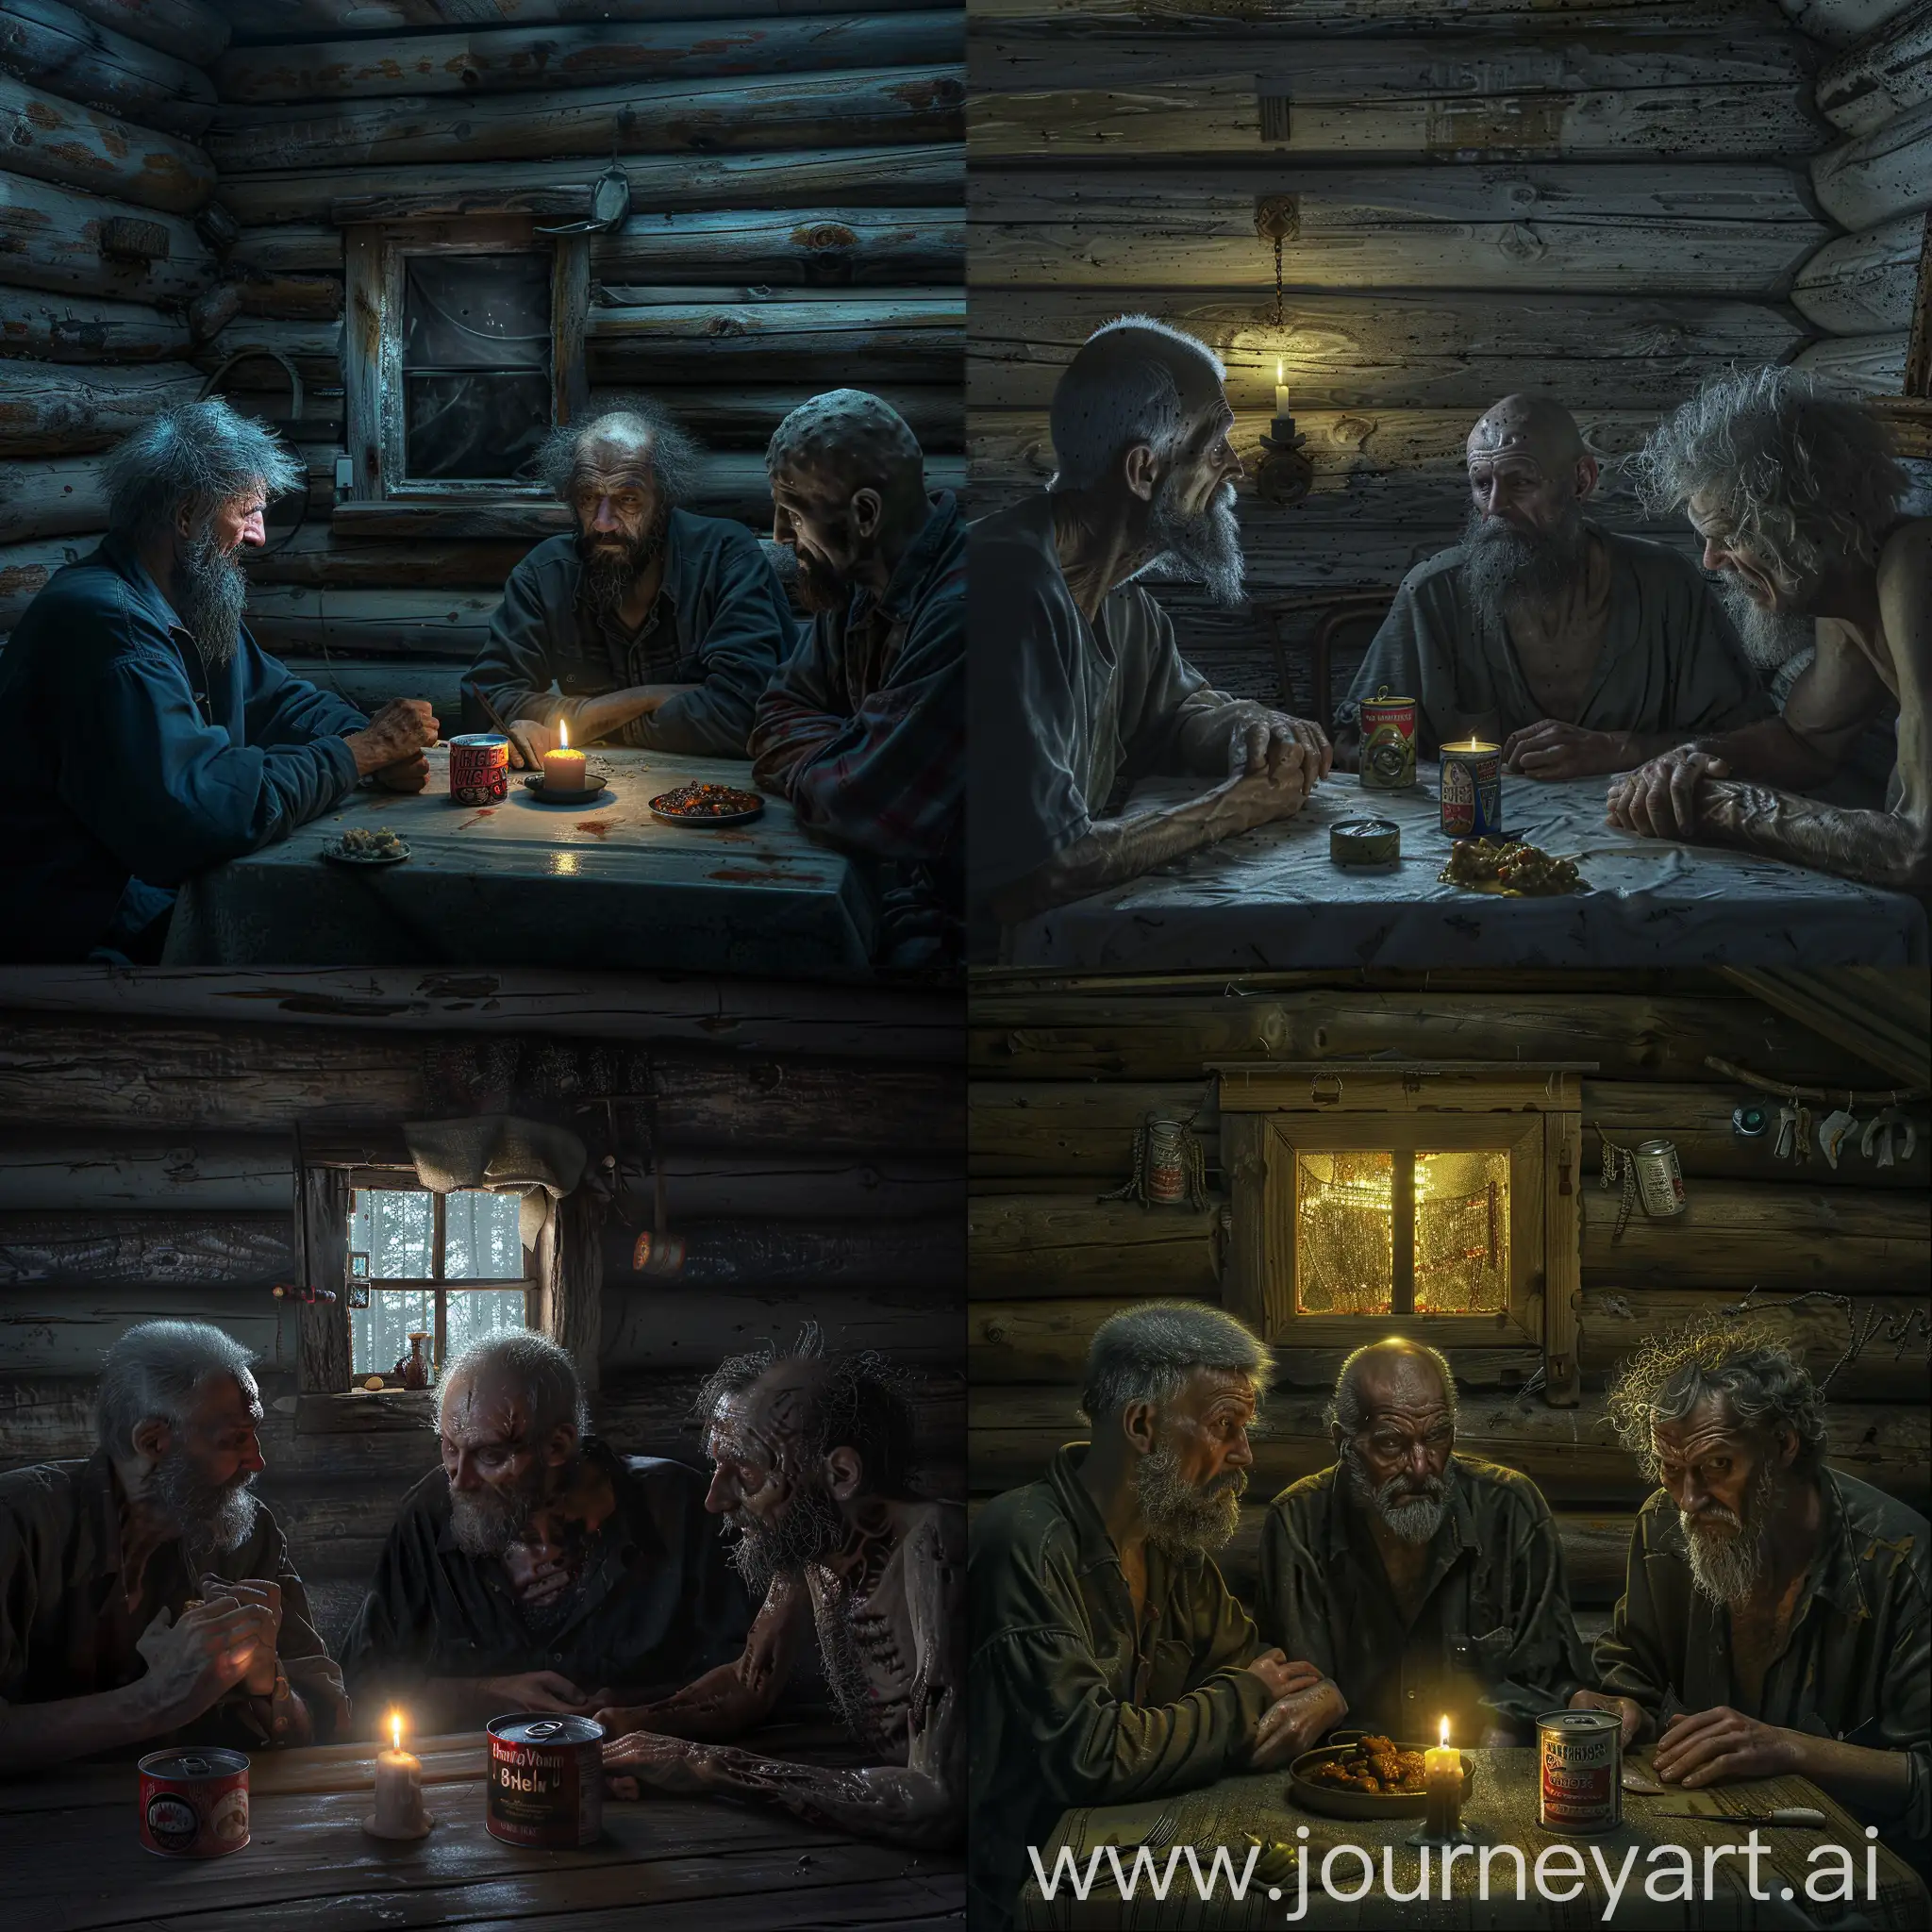 night, three men sitting at a table, an old house, a small window on the wall, walls made of logs, one man has a beard and gray hair, another has a beard and a bald head, the third has disheveled hair, gloomy atmosphere, a candle, a can of stew on the table, light only from a candle, horror, hyper-realism, 8K image quality, ultra detail